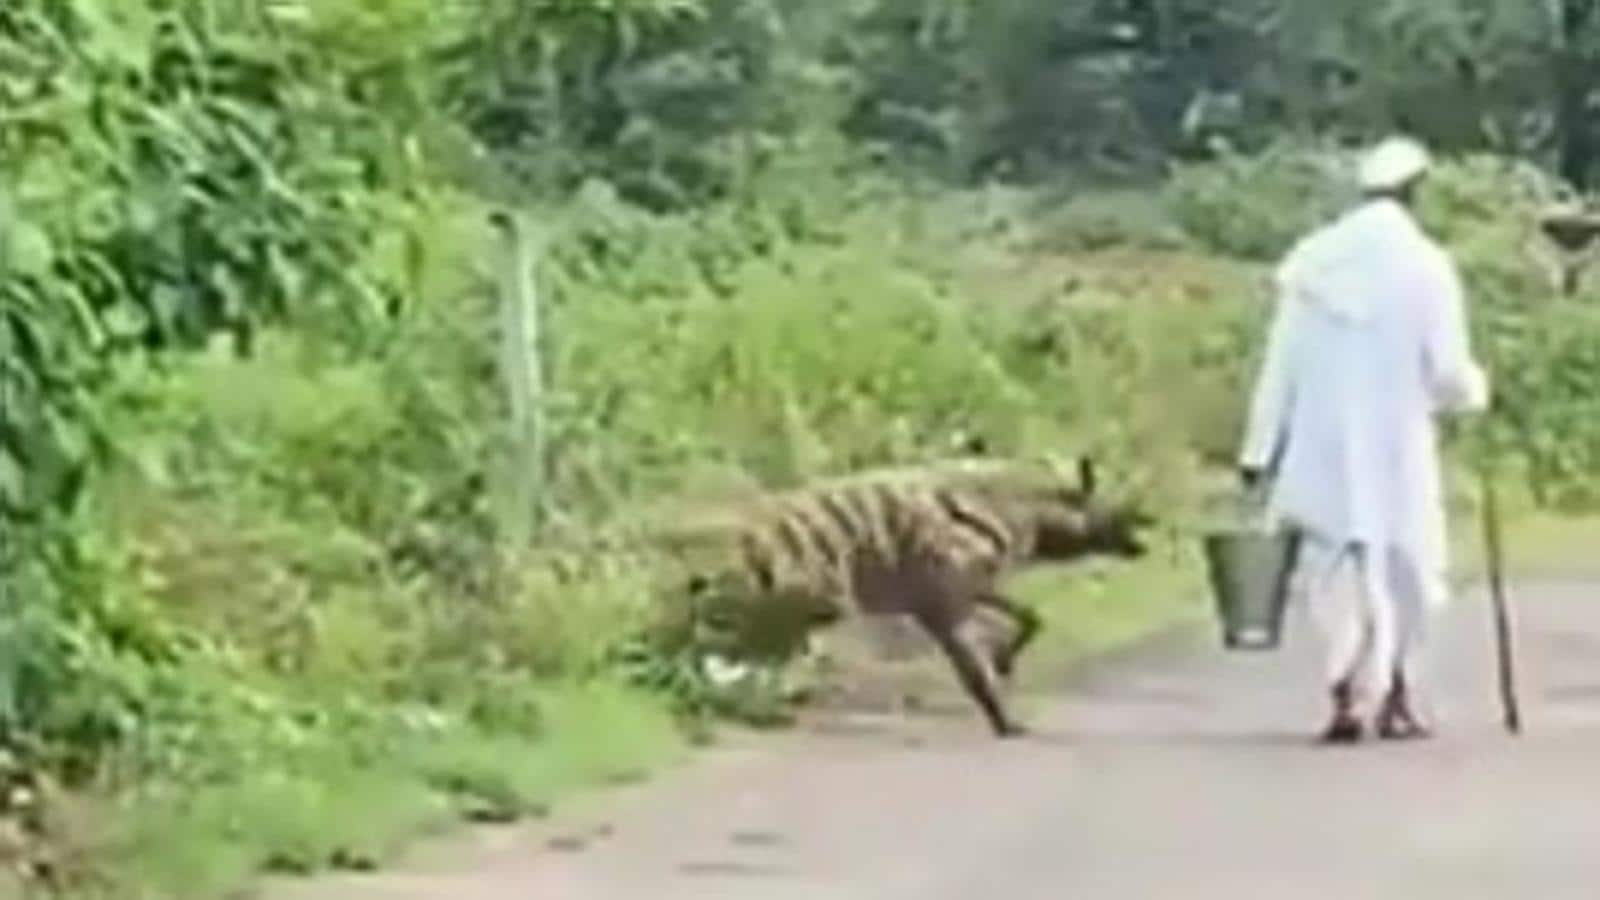 Hyena attacks 2 in Khed tehsil of Pune district, animal later found dead -  Hindustan Times